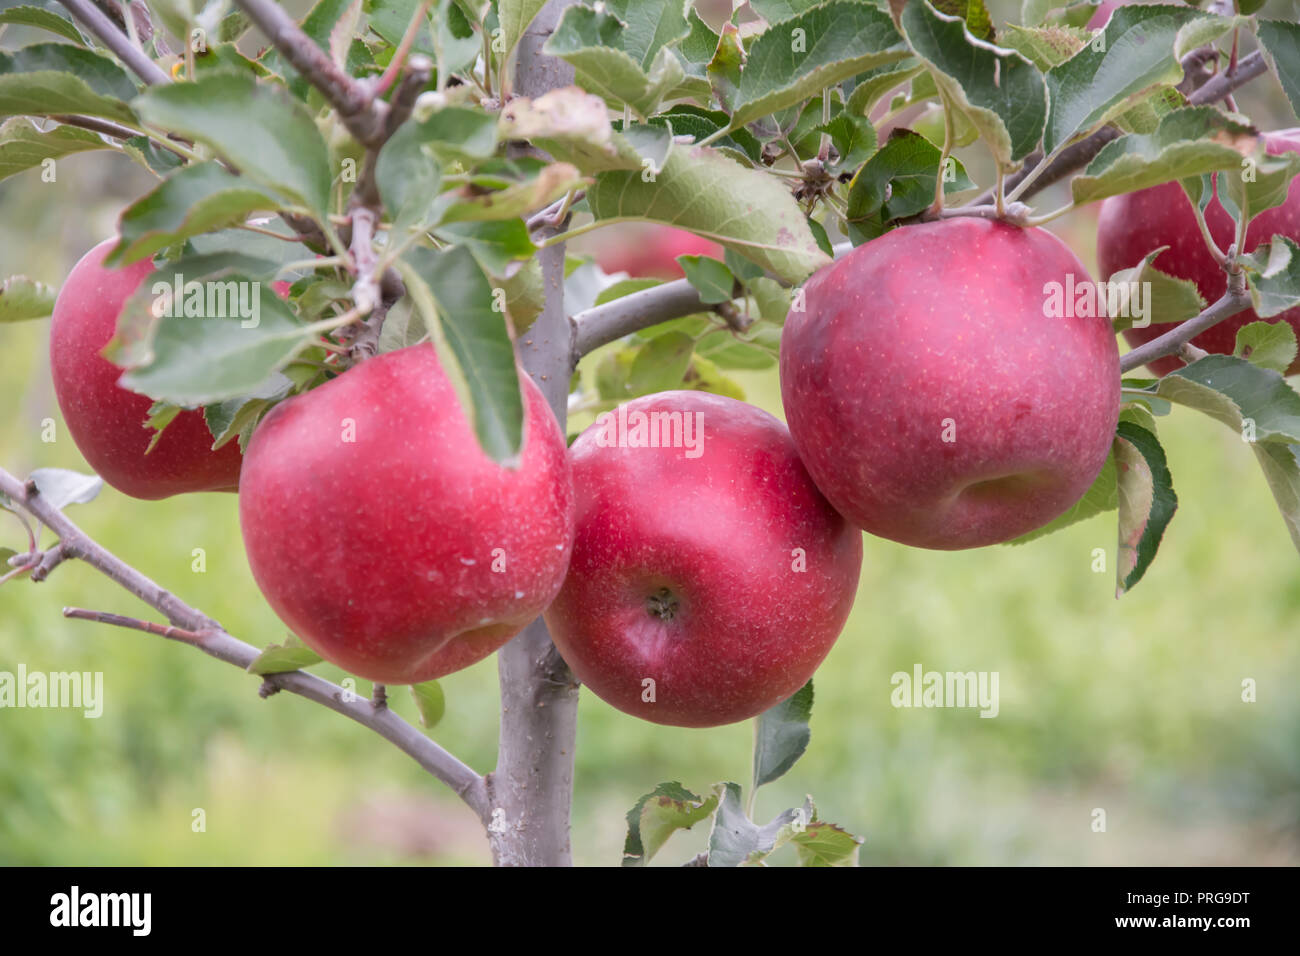 Four big, ripe, red apples hanging on a small apple tree Stock Photo